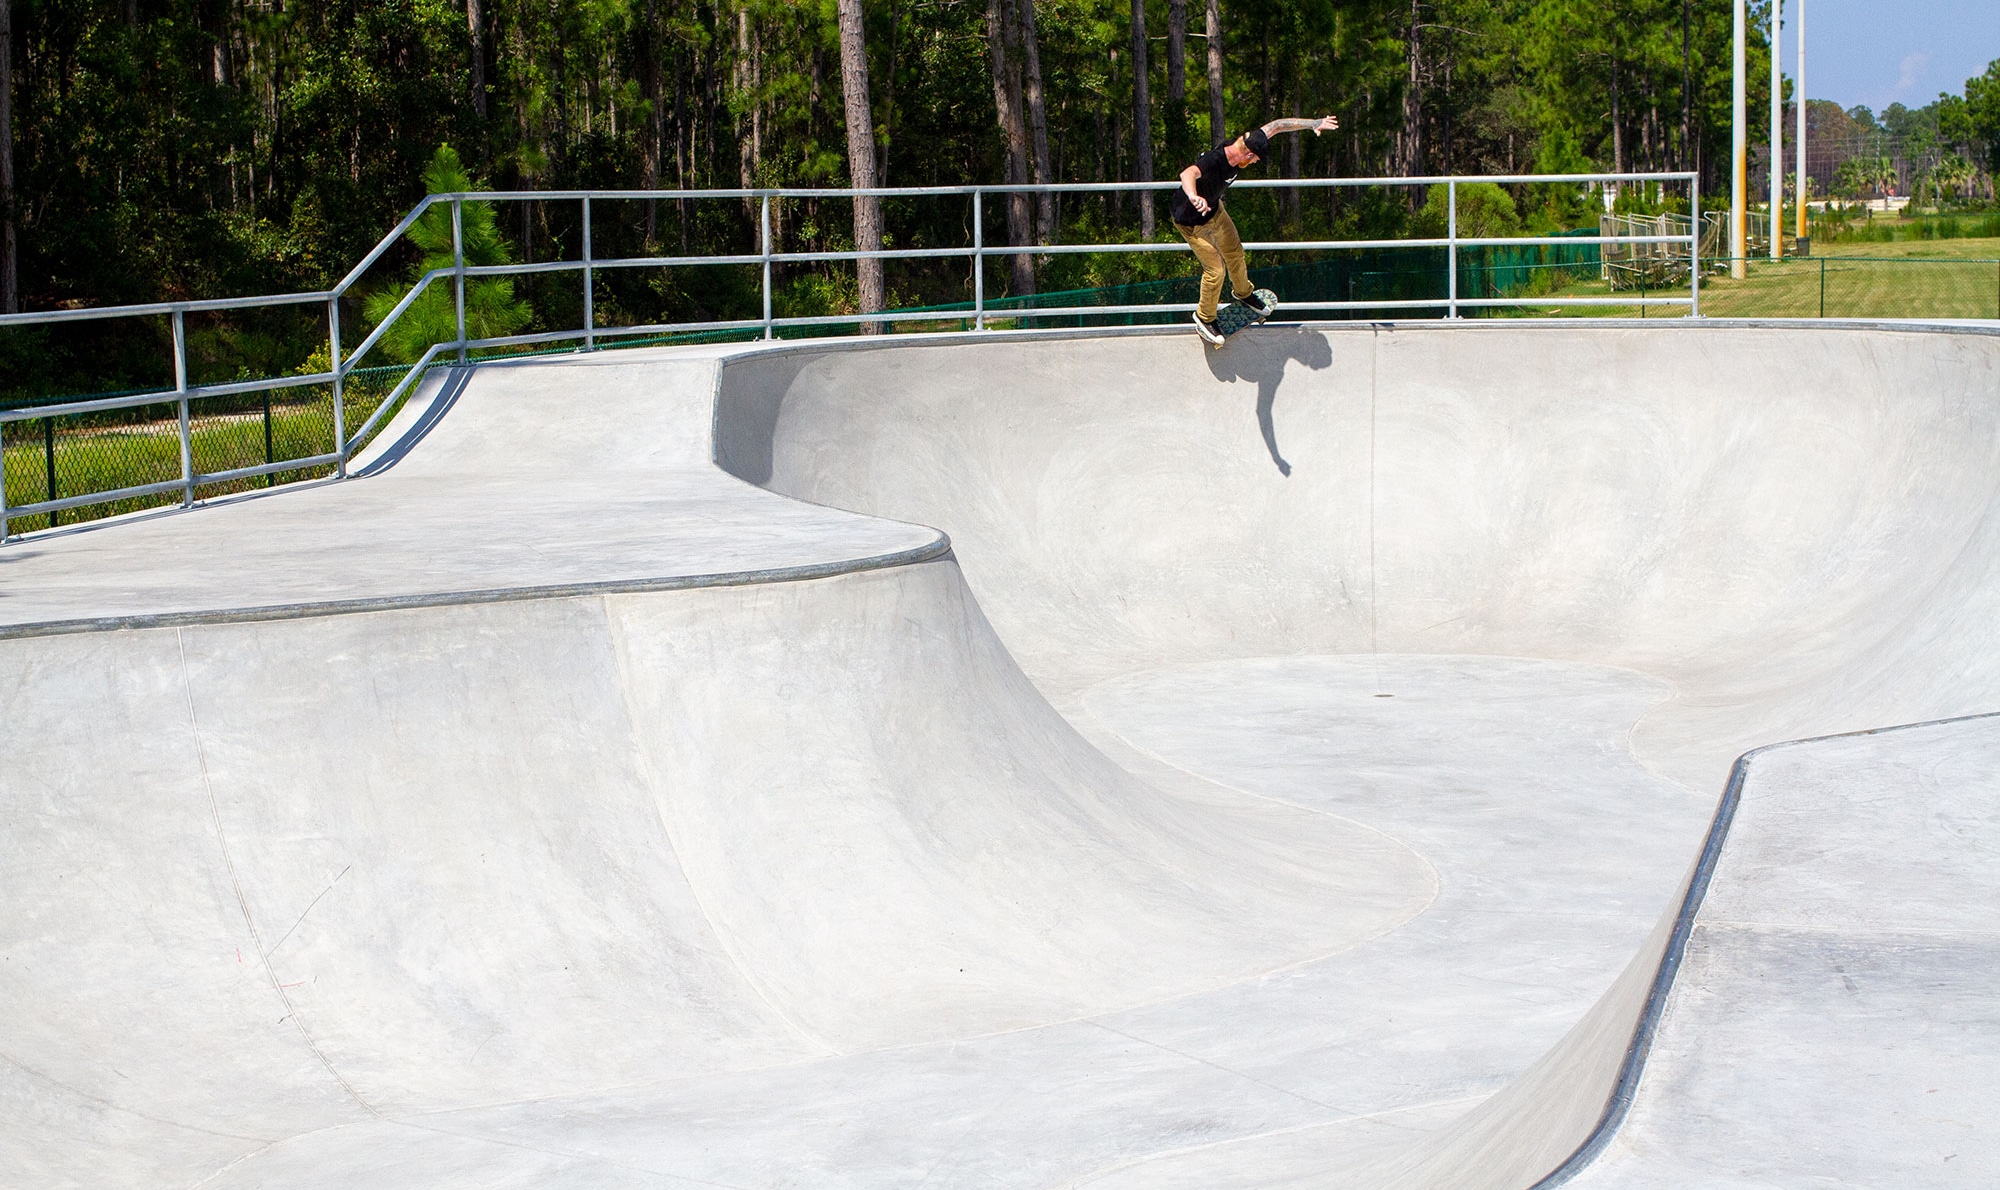 In the deep end of Walton County Skatepark Bowl